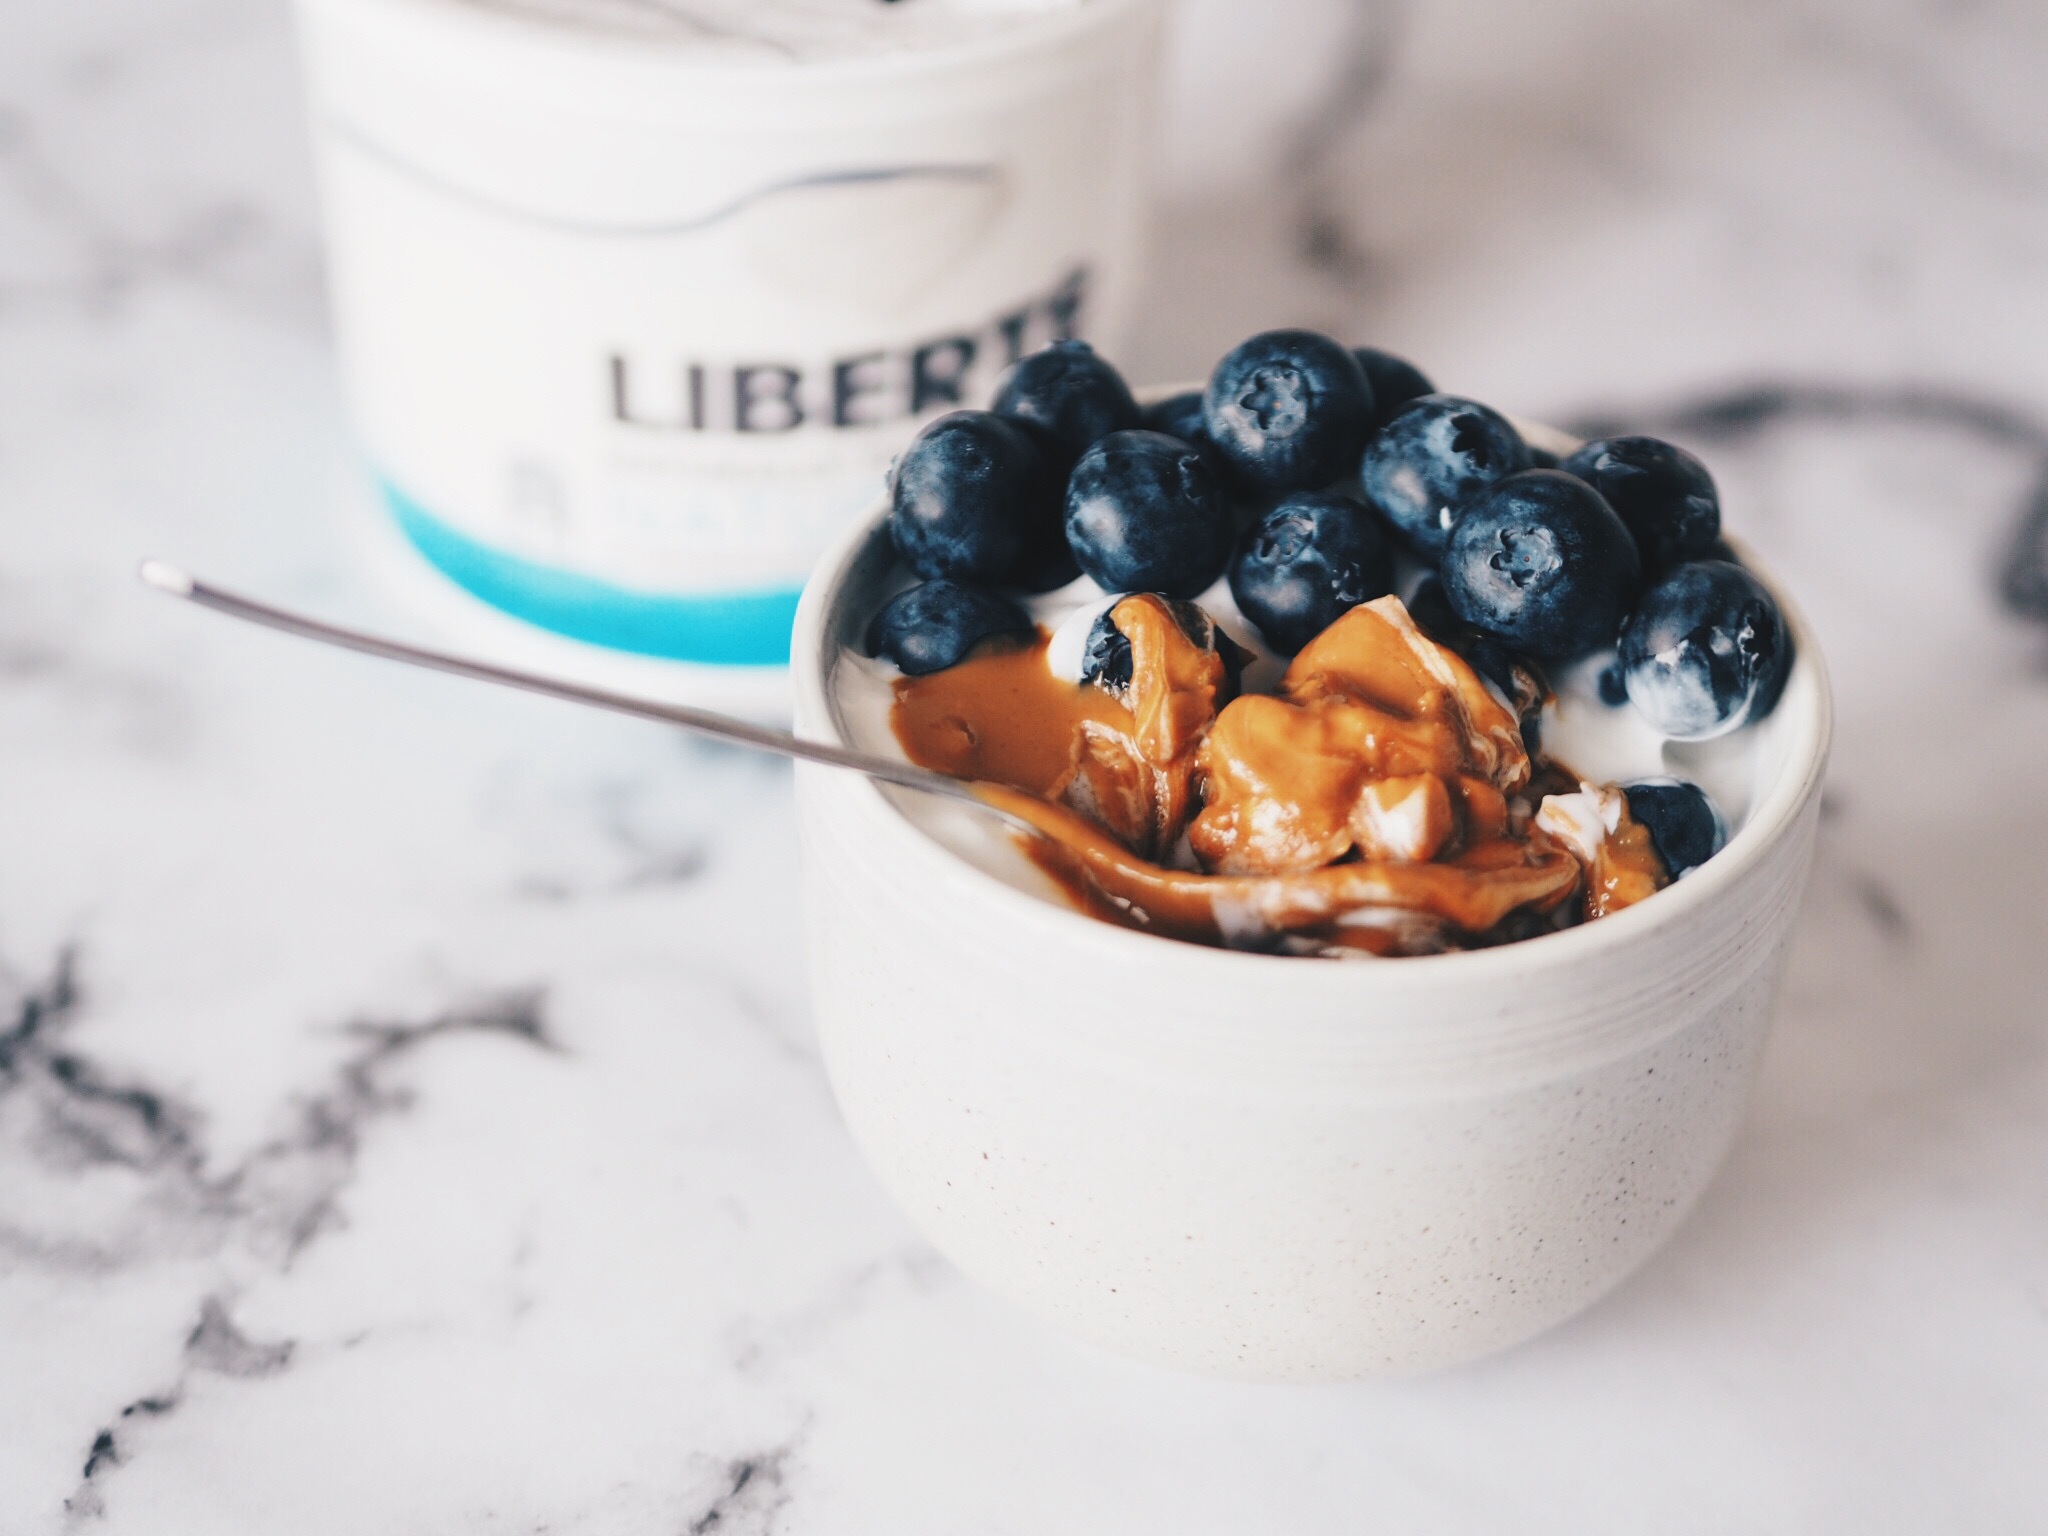 Liberte yogurt in bowl with peanut butter and blueberries